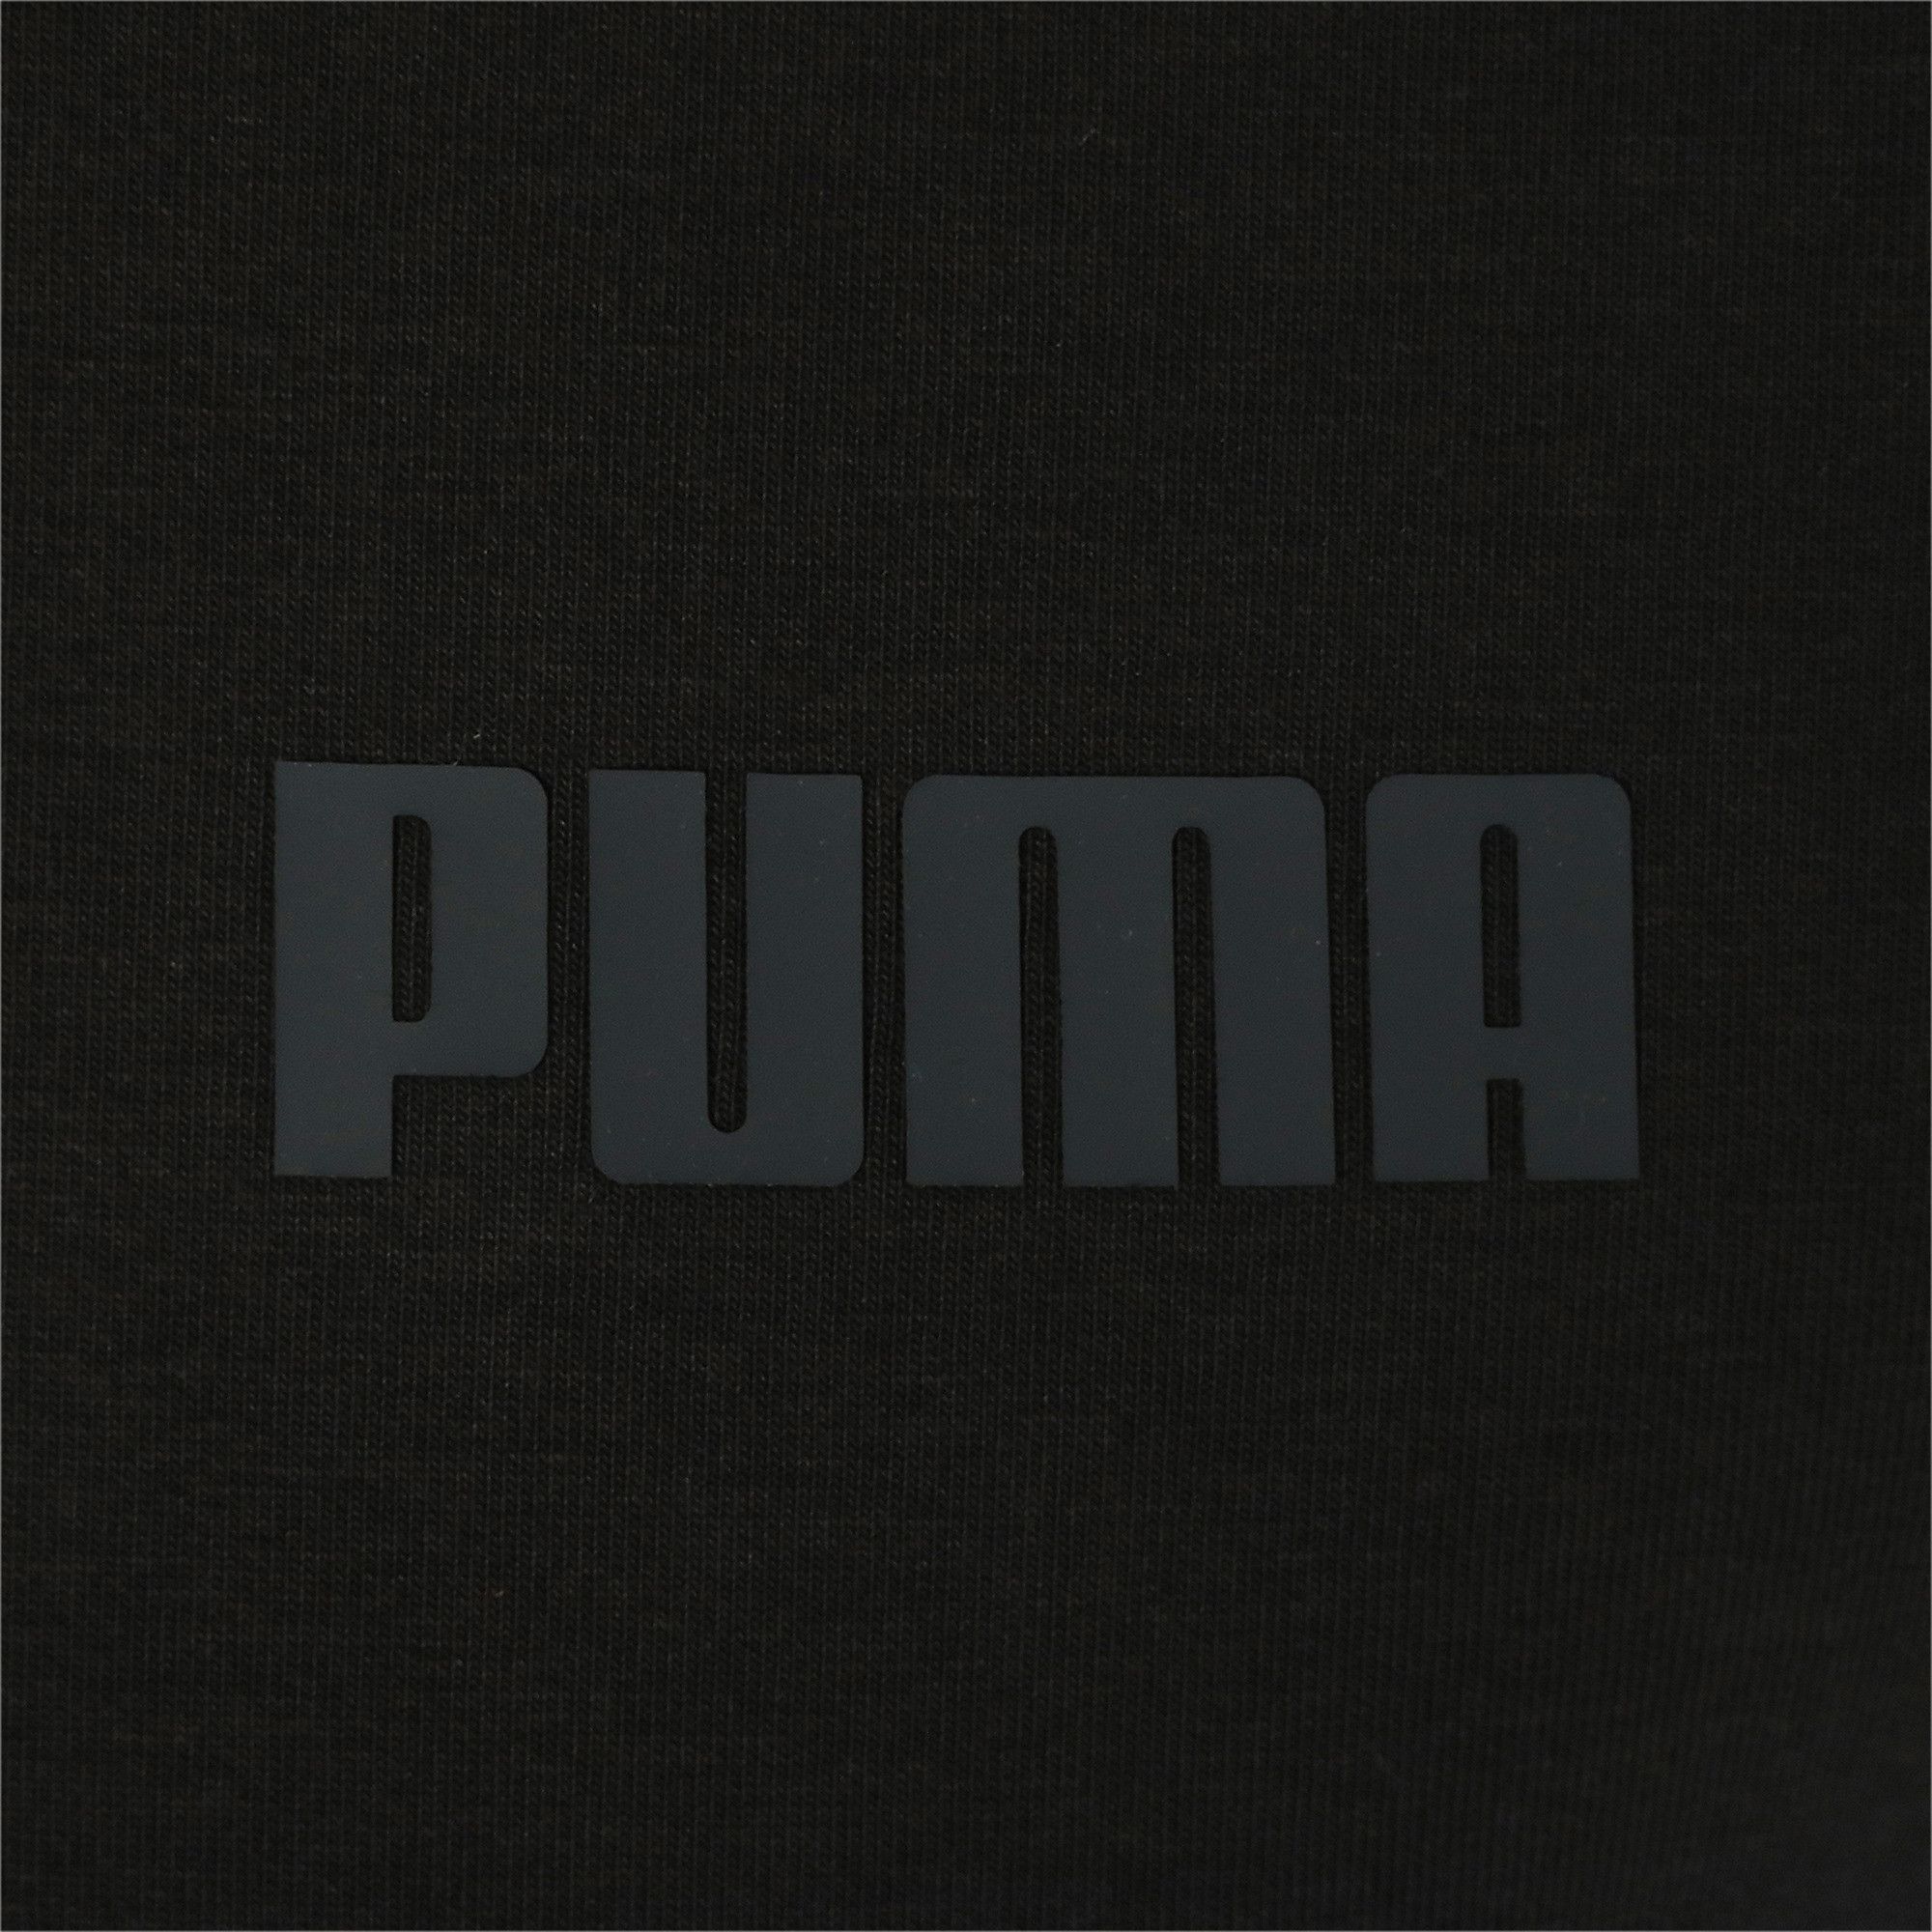  Perfect for relaxing at home or heading out, the SPACER Hoodie will keep you dry and fresh, thanks to its moisture-wicking material. DETAILS Regular fitHooded neckComfortable style by PUMAPUMA branding detailsSignature PUMA design elements